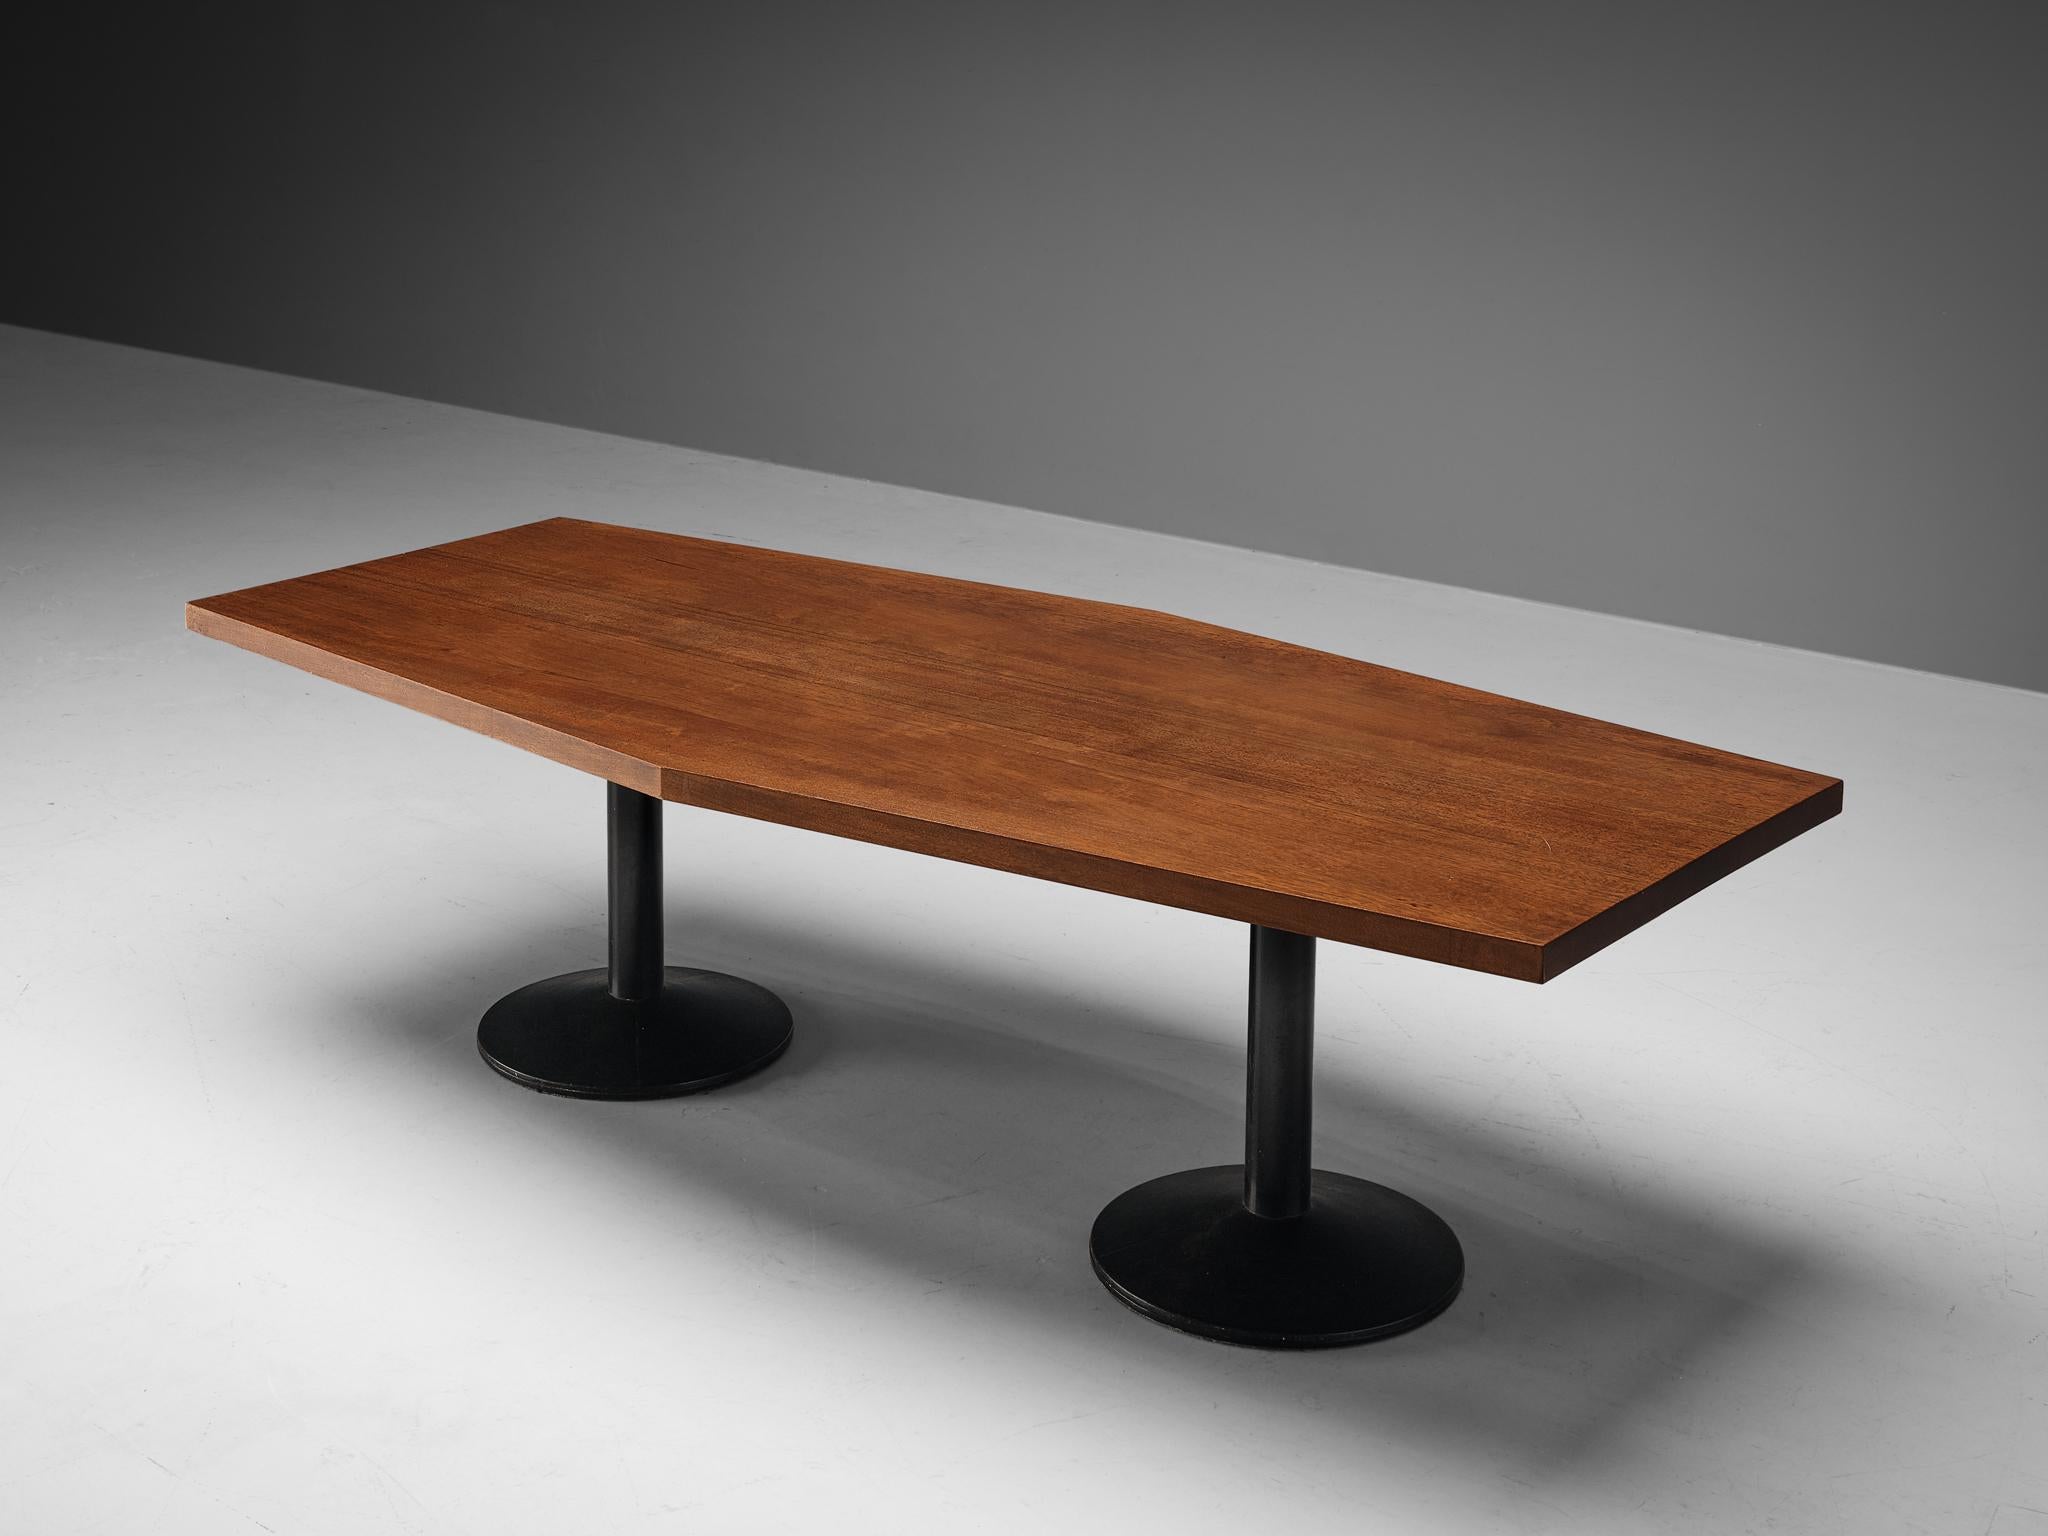 Wim den Boon, dining table model ’01-69’, solid mahogany, lacquered metal, The Netherlands, design 1961

This utterly well-designed table is executed in a beautiful elongated hexagon shape which adds a visual excitement to the room, created by the